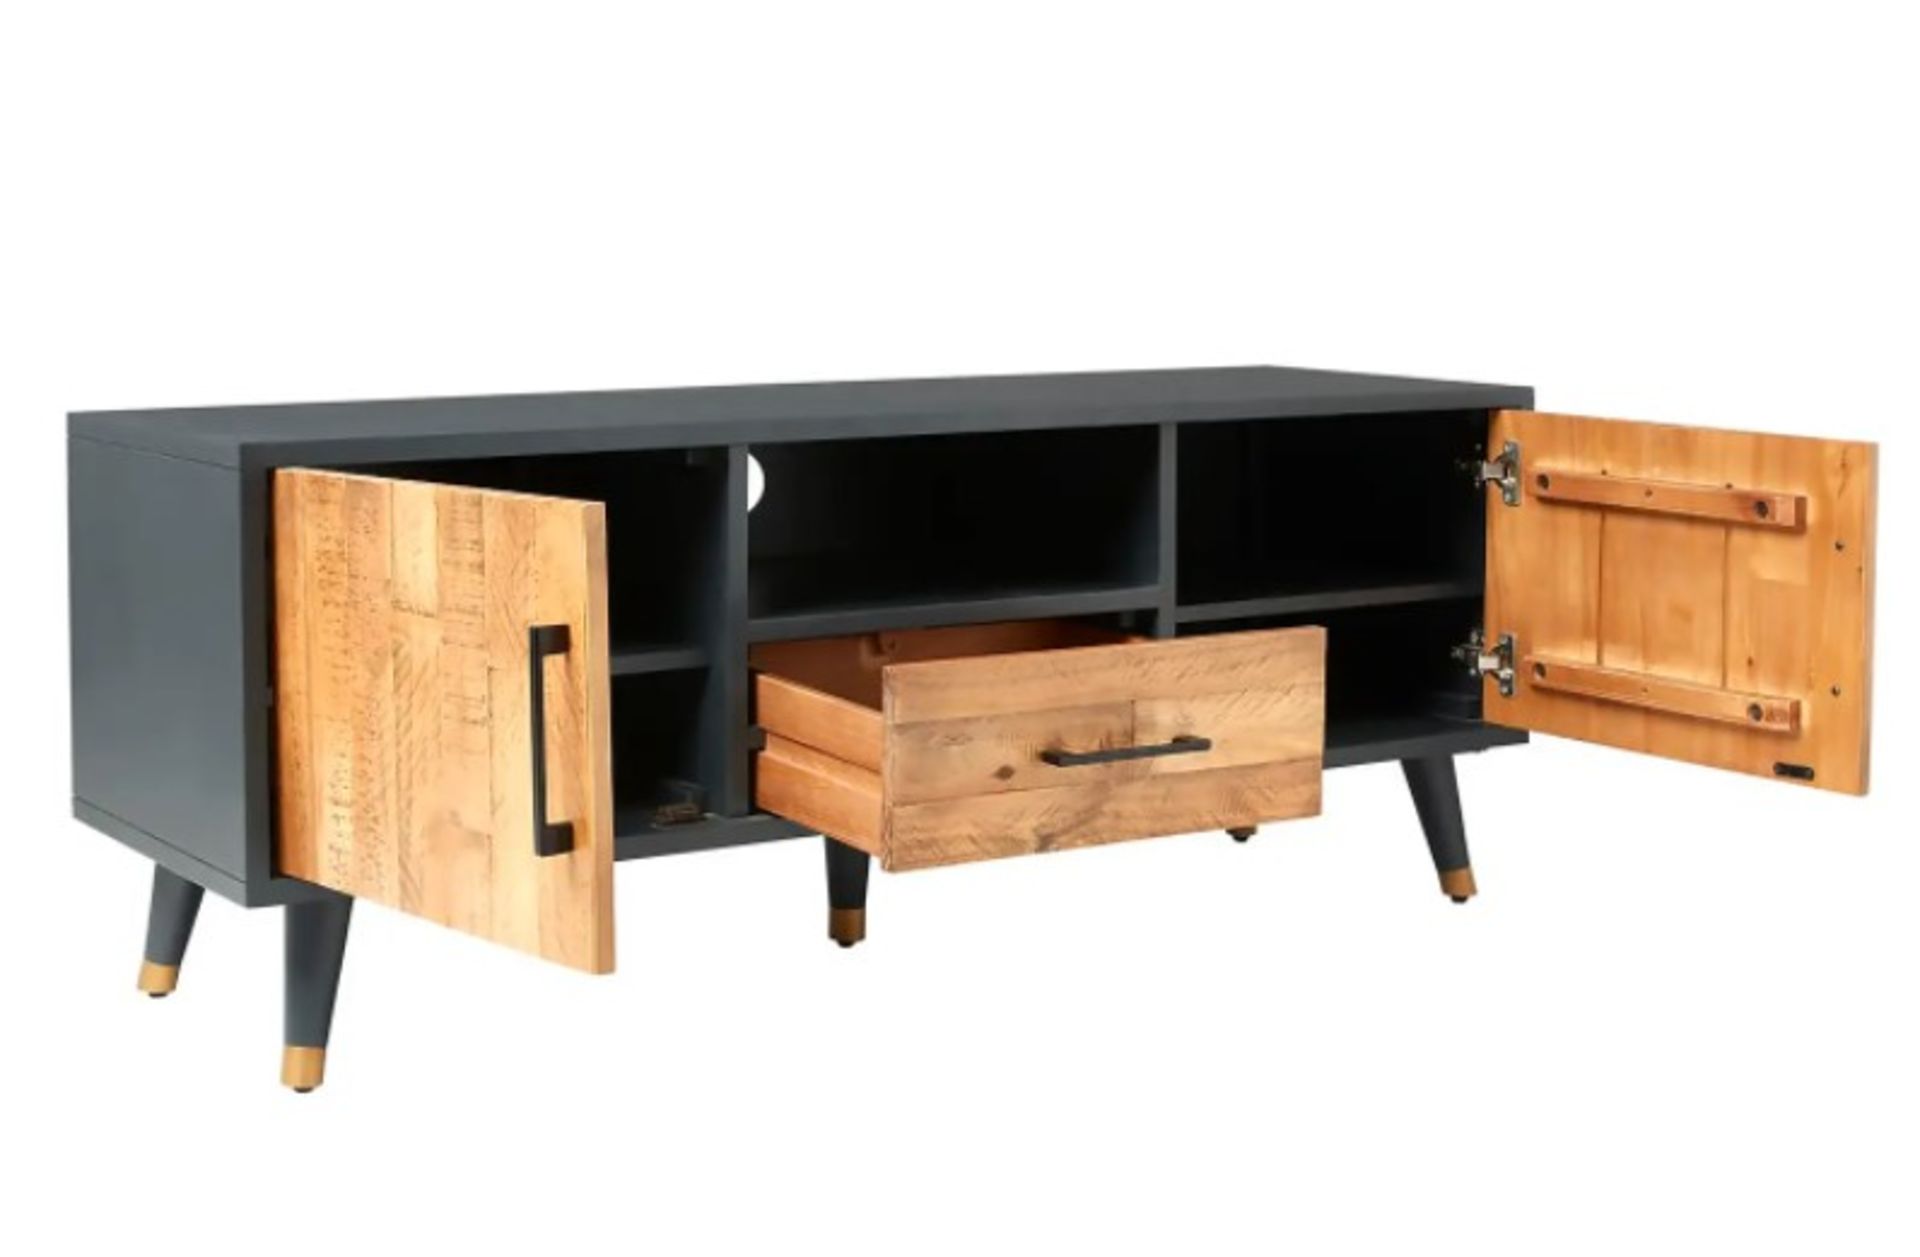 (Mz) 1x Franklin Wide TV Stand RRP £325. (H)50 x (W)134 x (D)40cm - Image 3 of 4